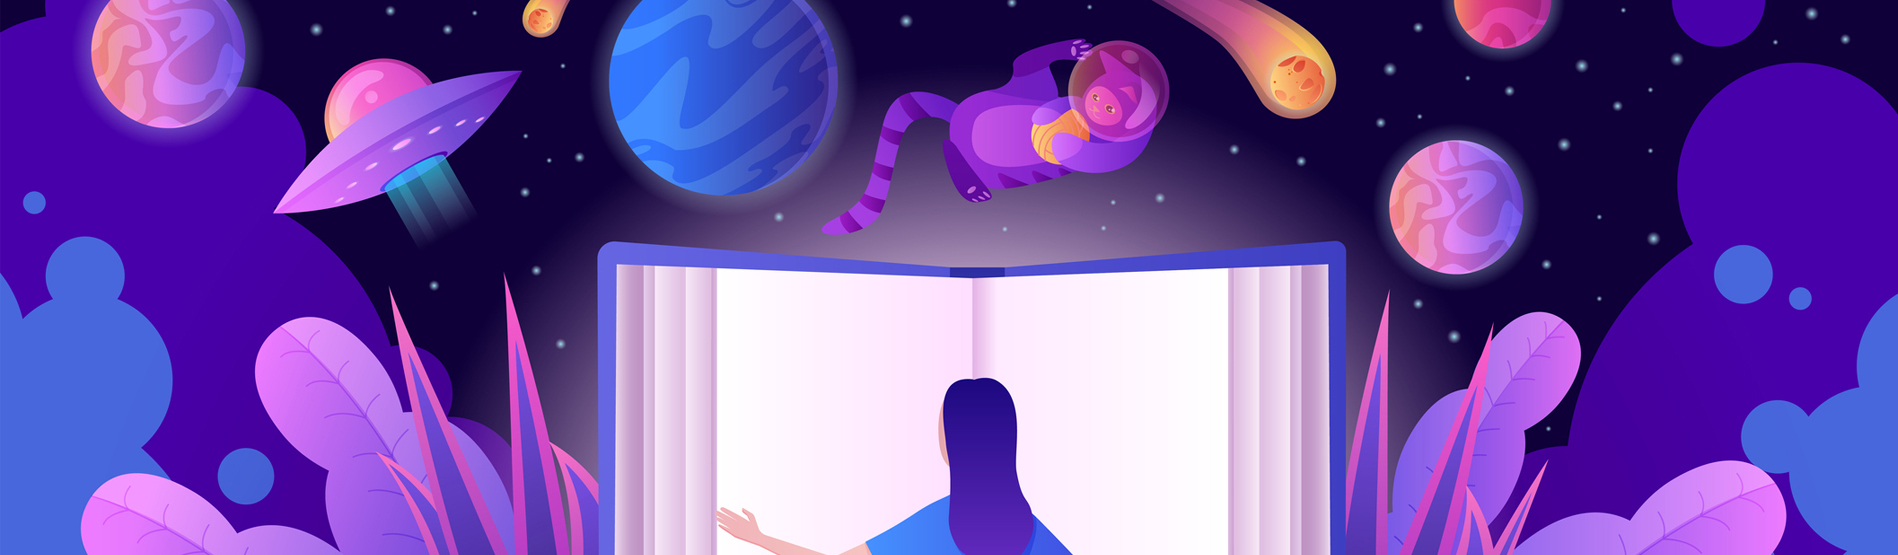 Girl reading a book surrounded by space imagery